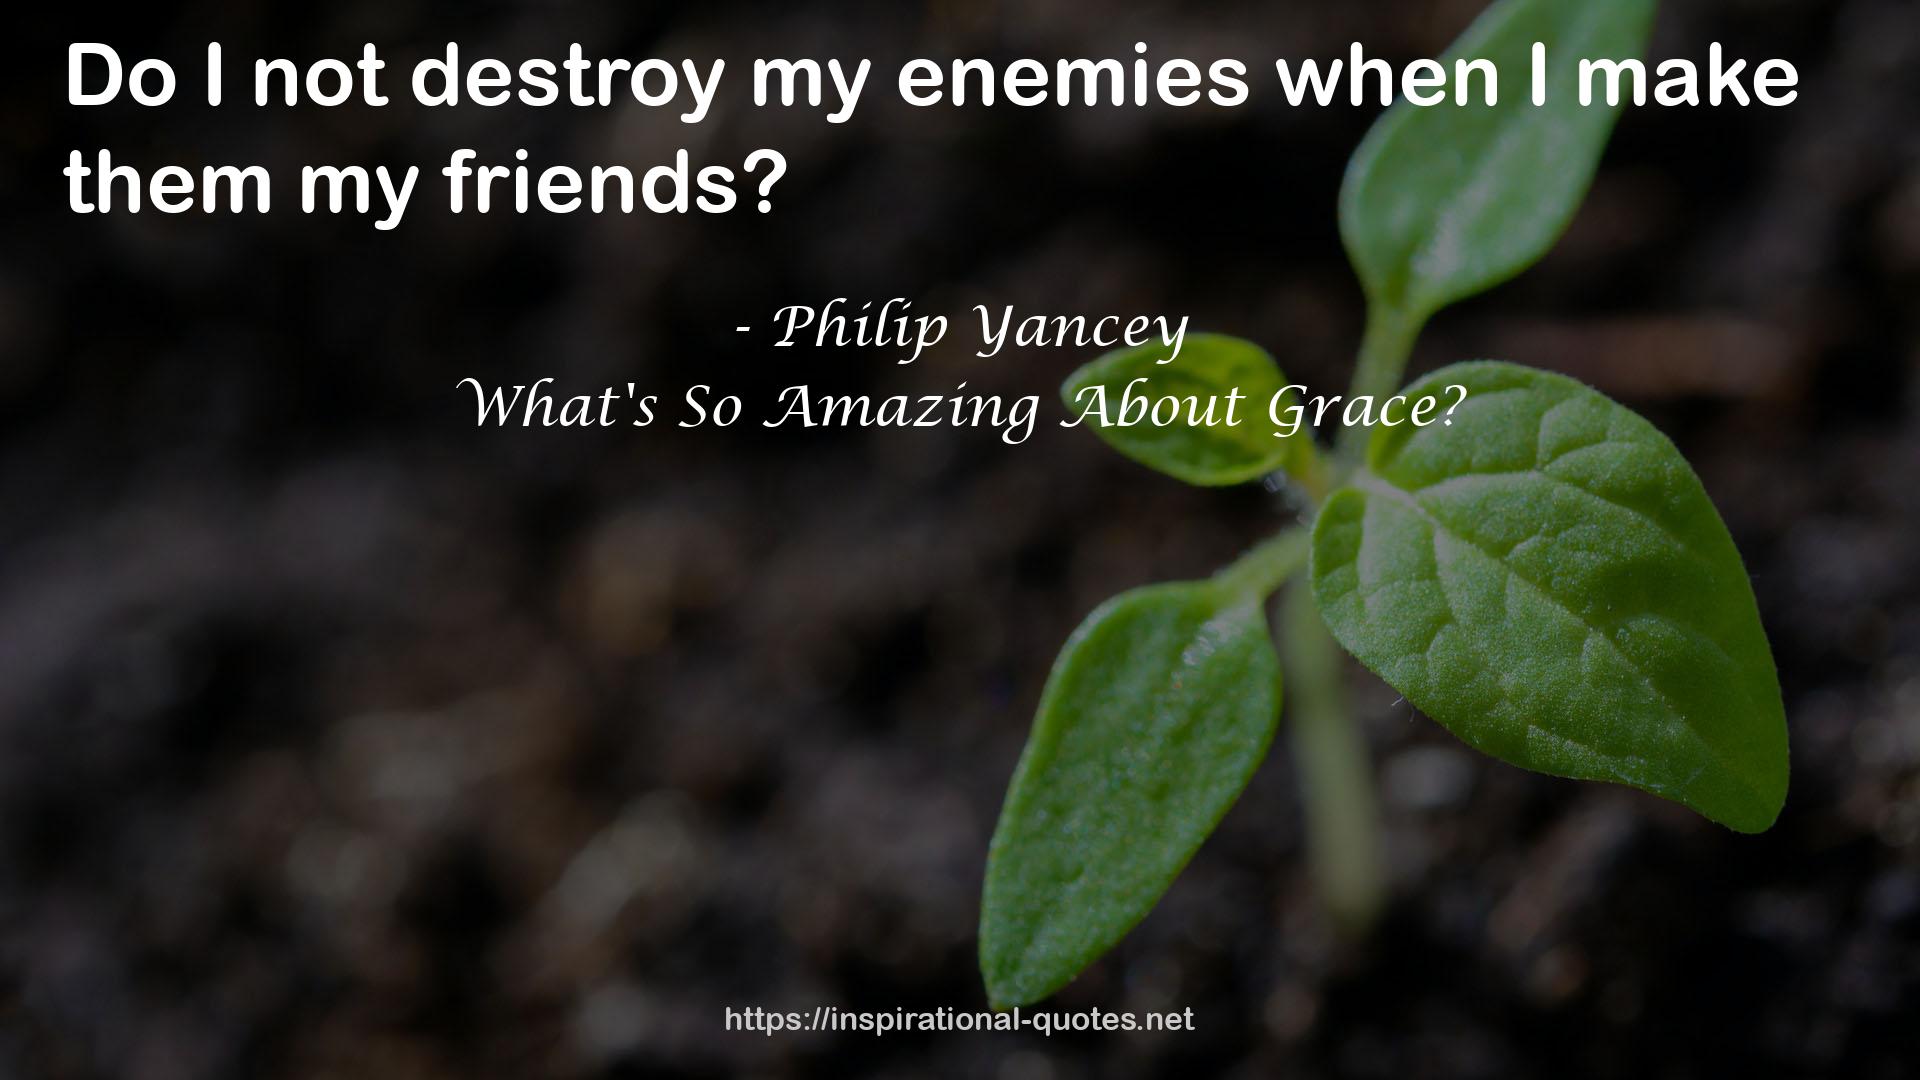 What's So Amazing About Grace? QUOTES